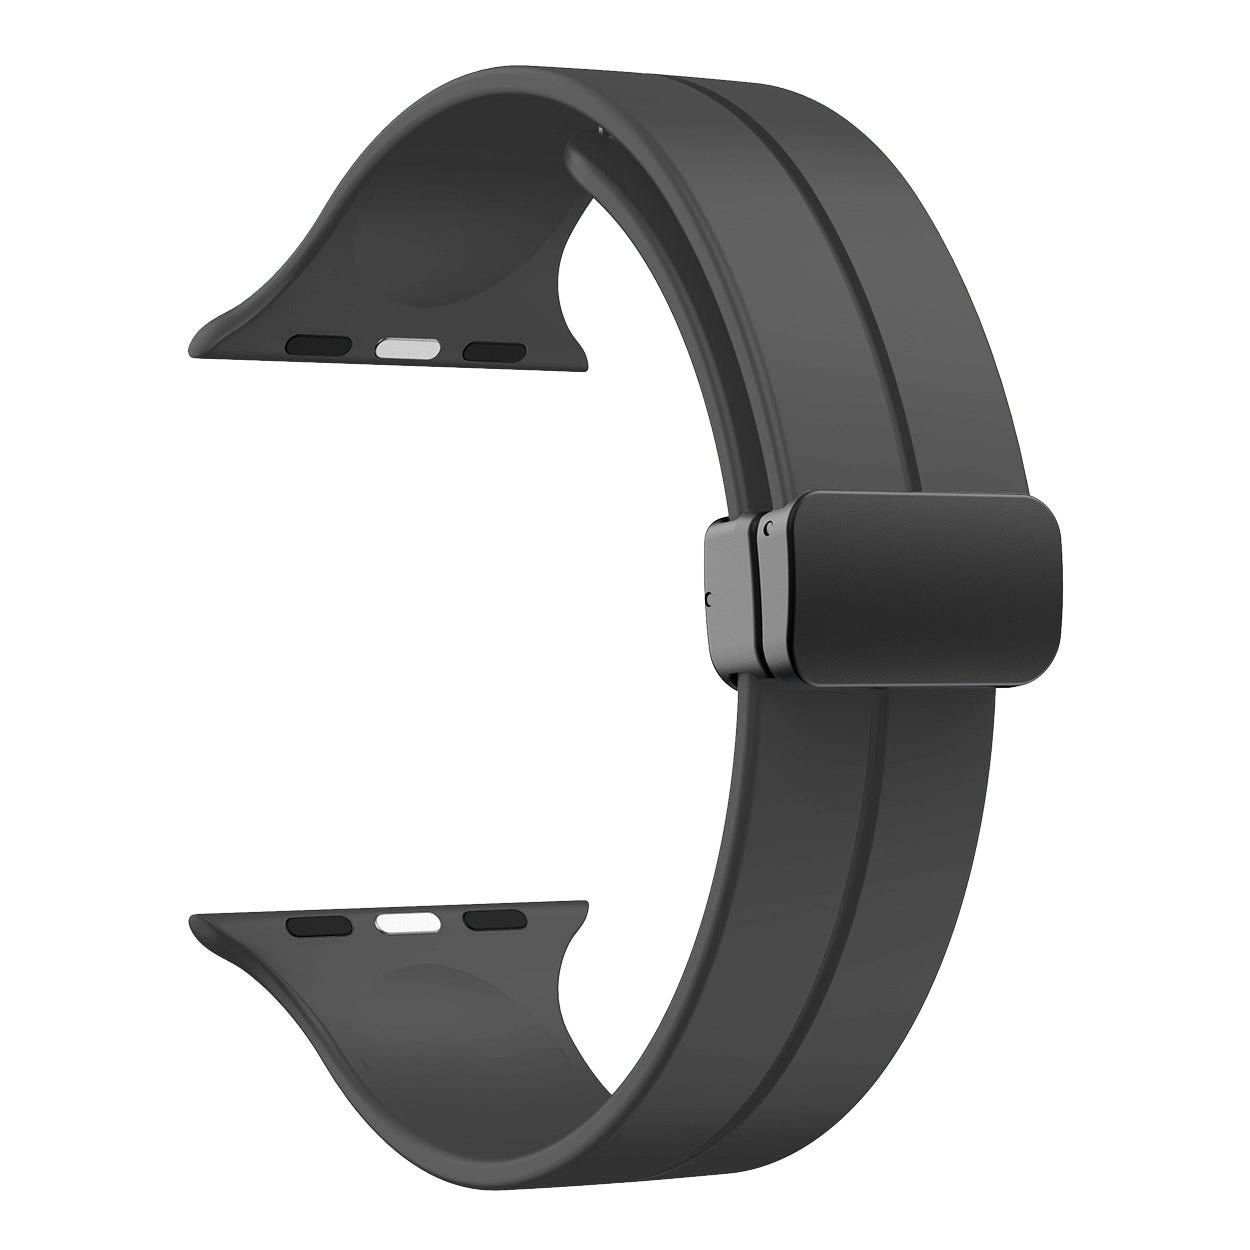 [Apple Watch] Flexi Silicone with Magnetic Deployant Clasp